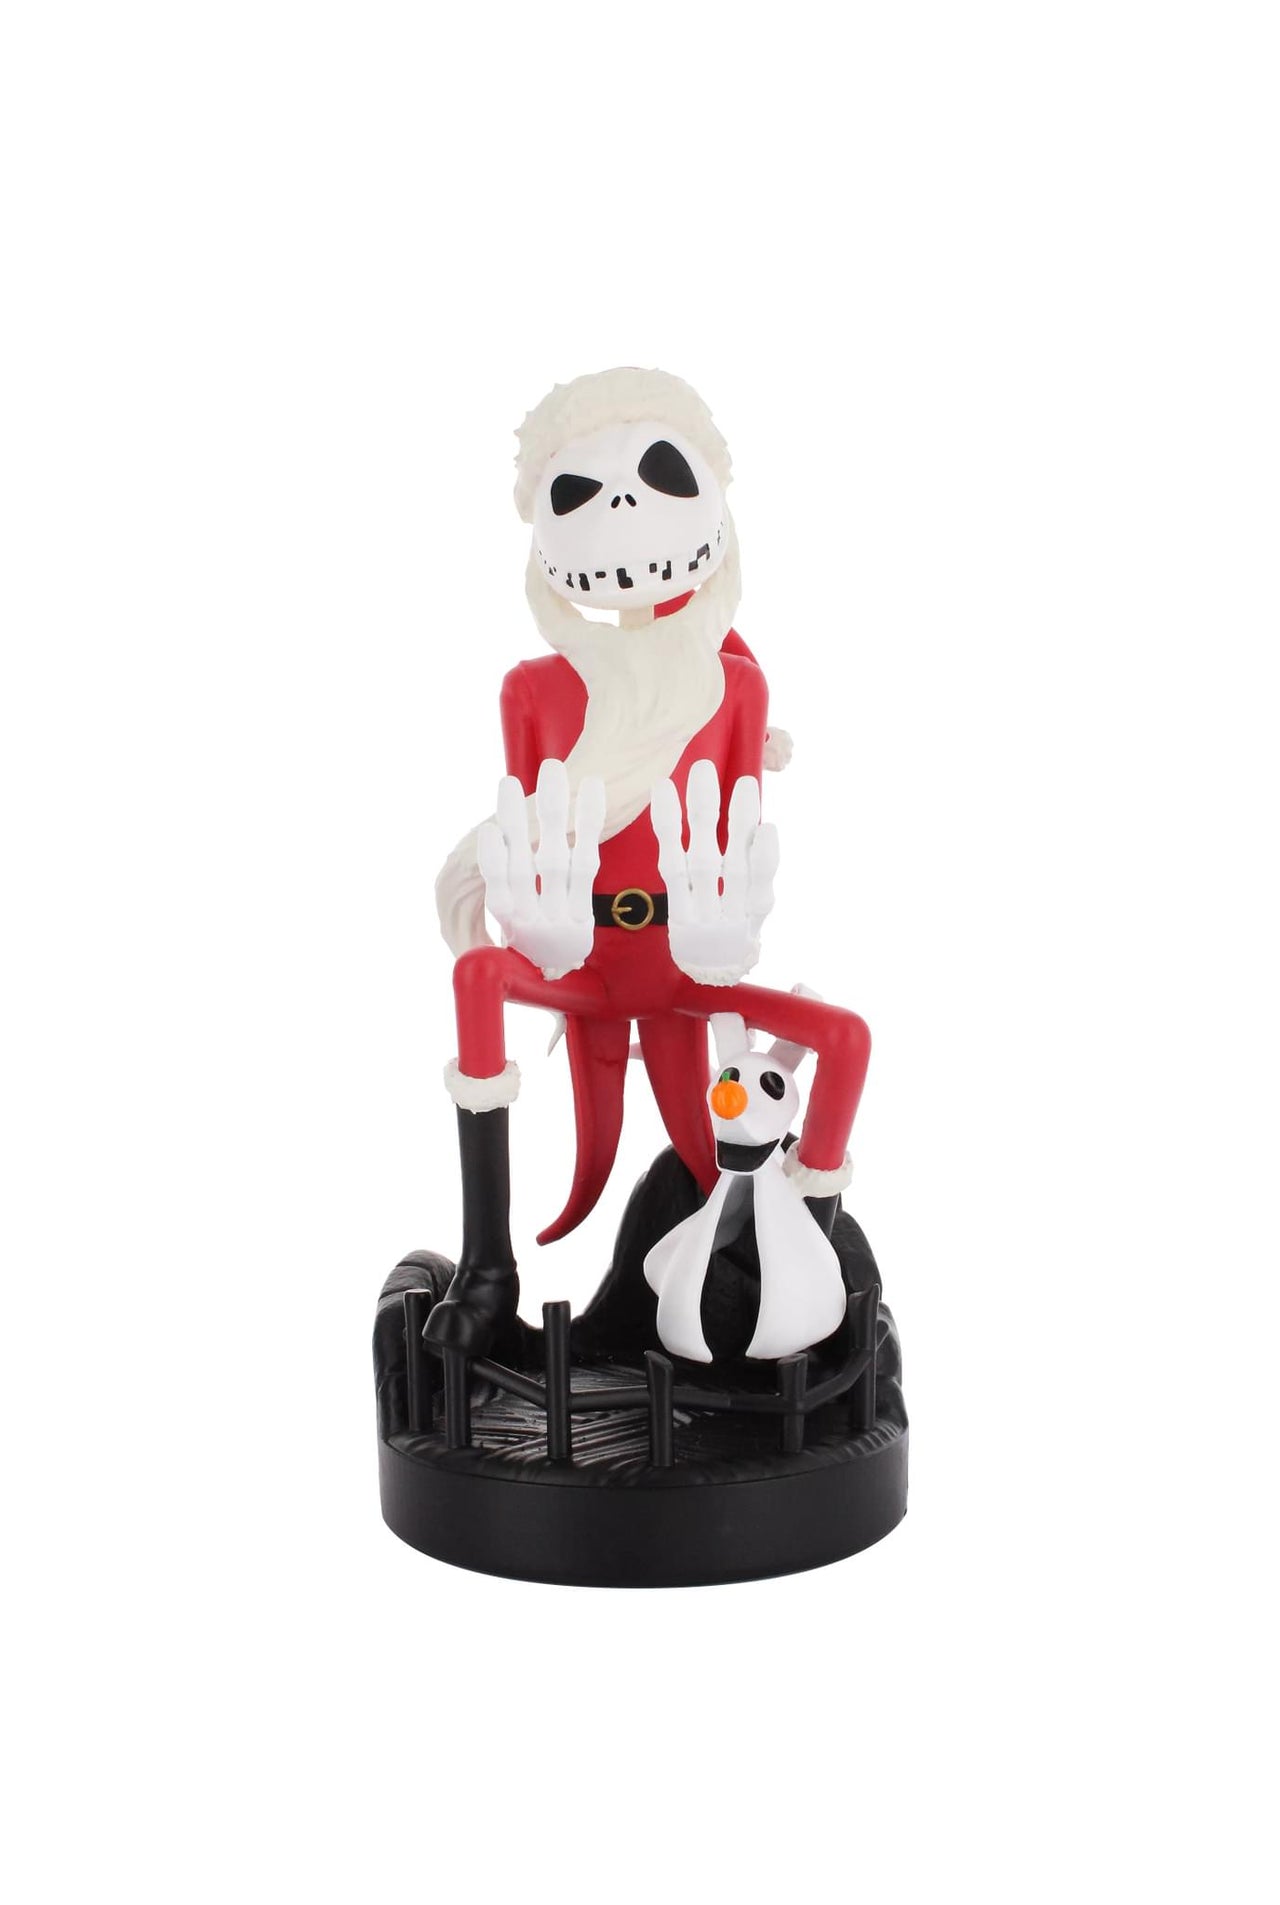 The Nightmare Before Christmas: Jack Skellington In Santa Suit Cable Guys Original Controller and Phone Holder - EXG Pro